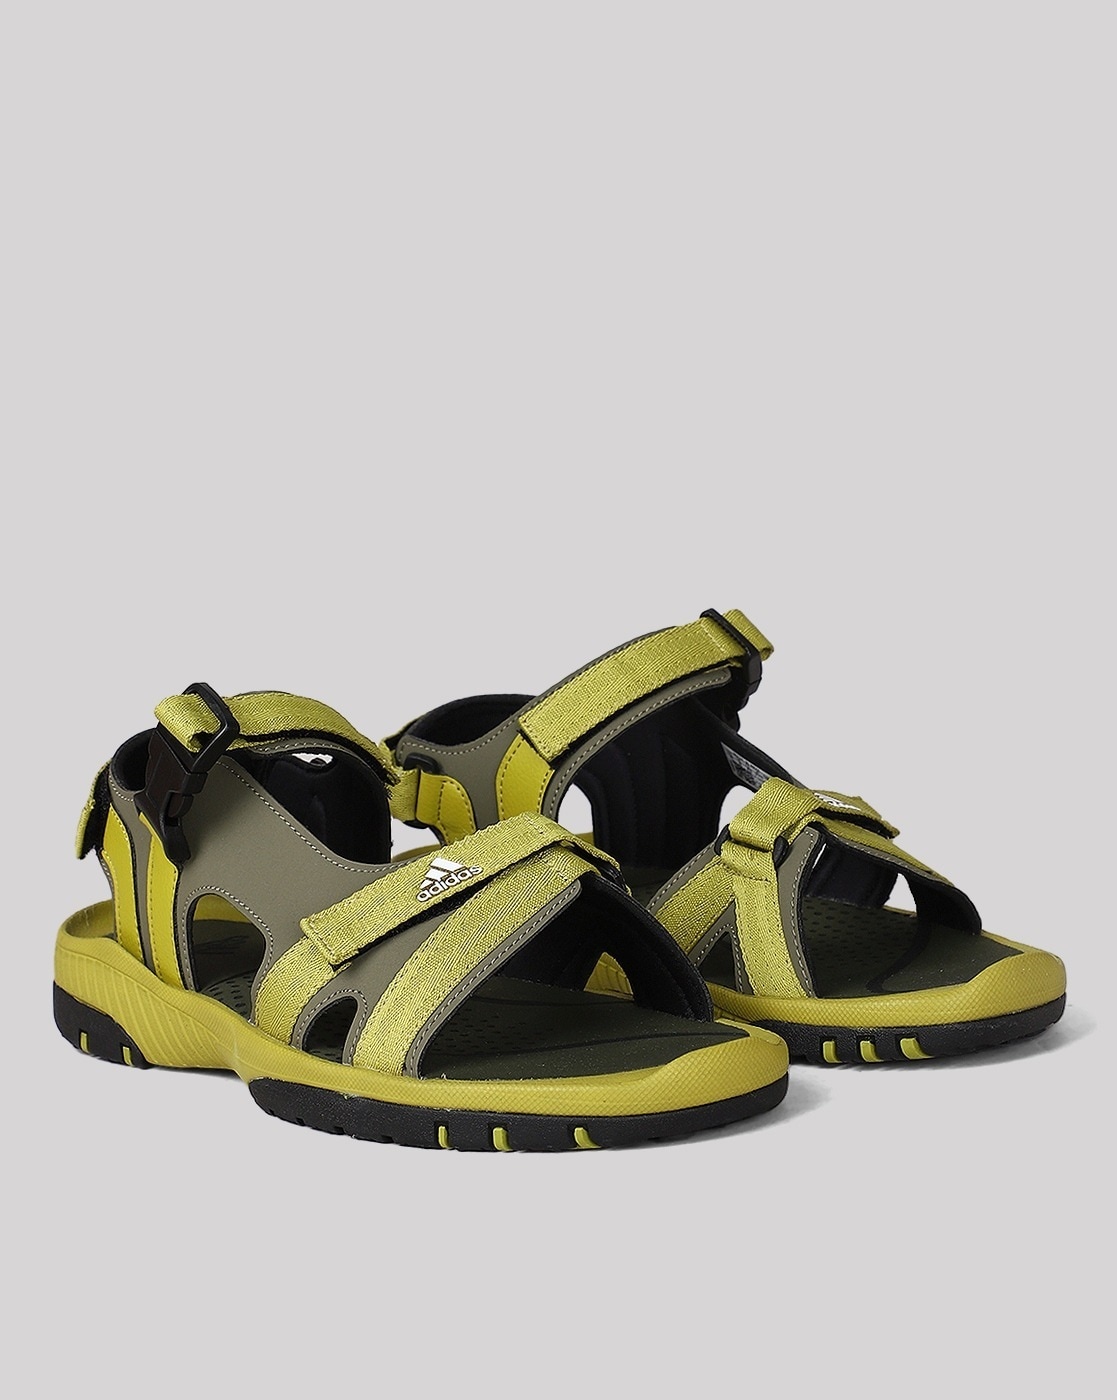 Paragon Blot Olive Green  Yellow Sandals for Men